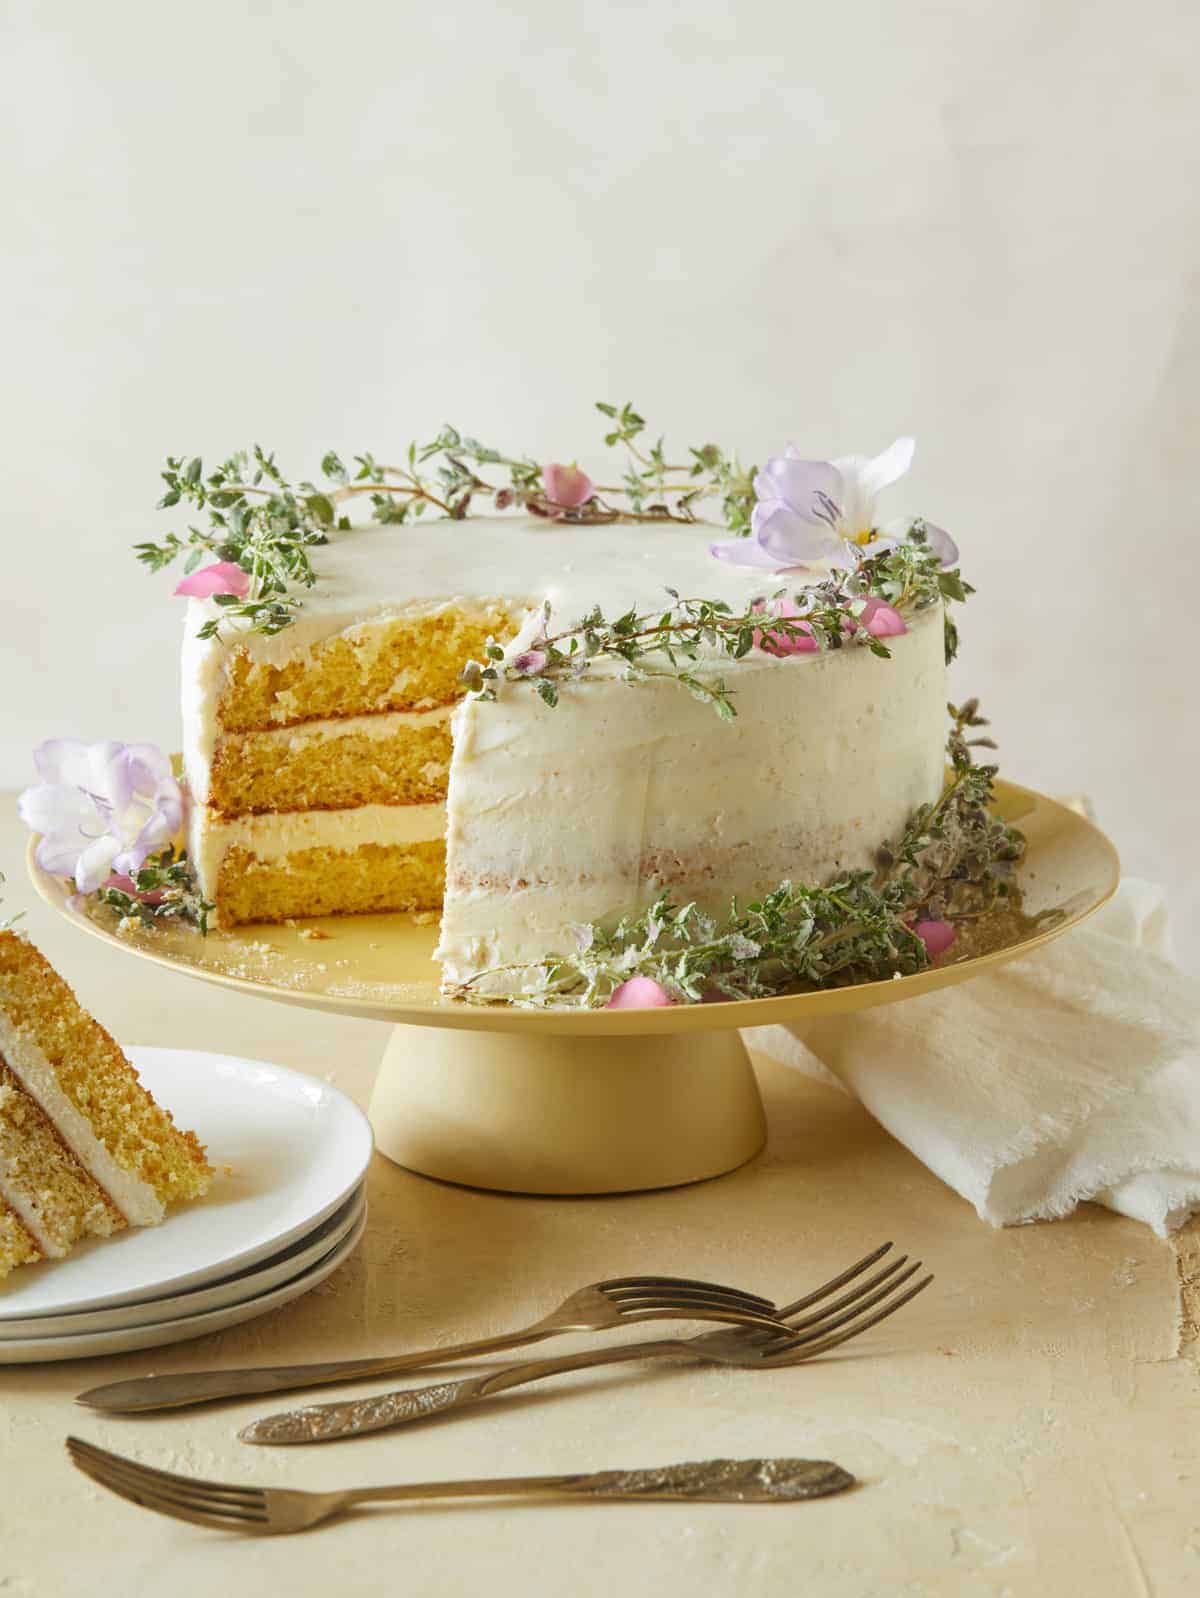 James Martin's delectable brown butter cake